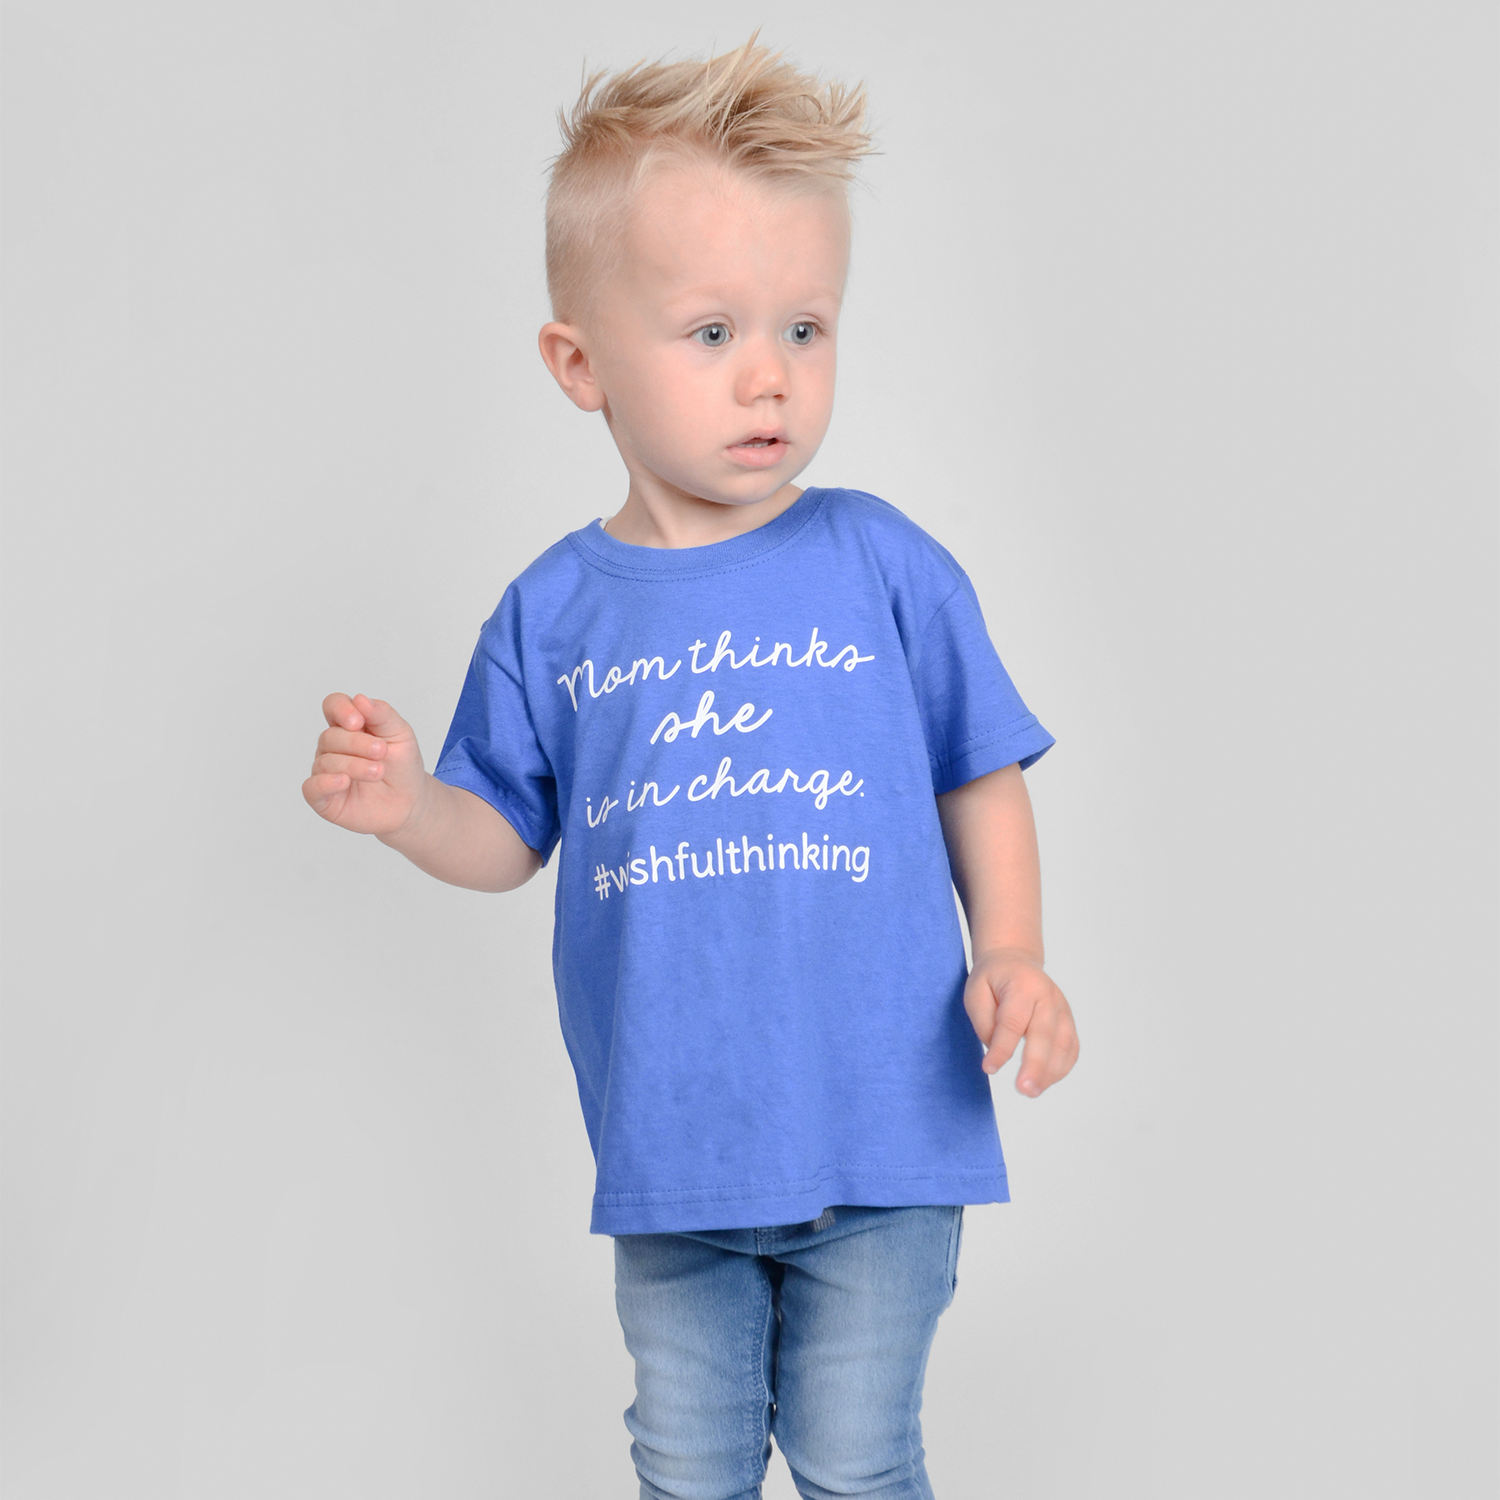 'Mom thinks she is in charge' kids shortsleeve shirt